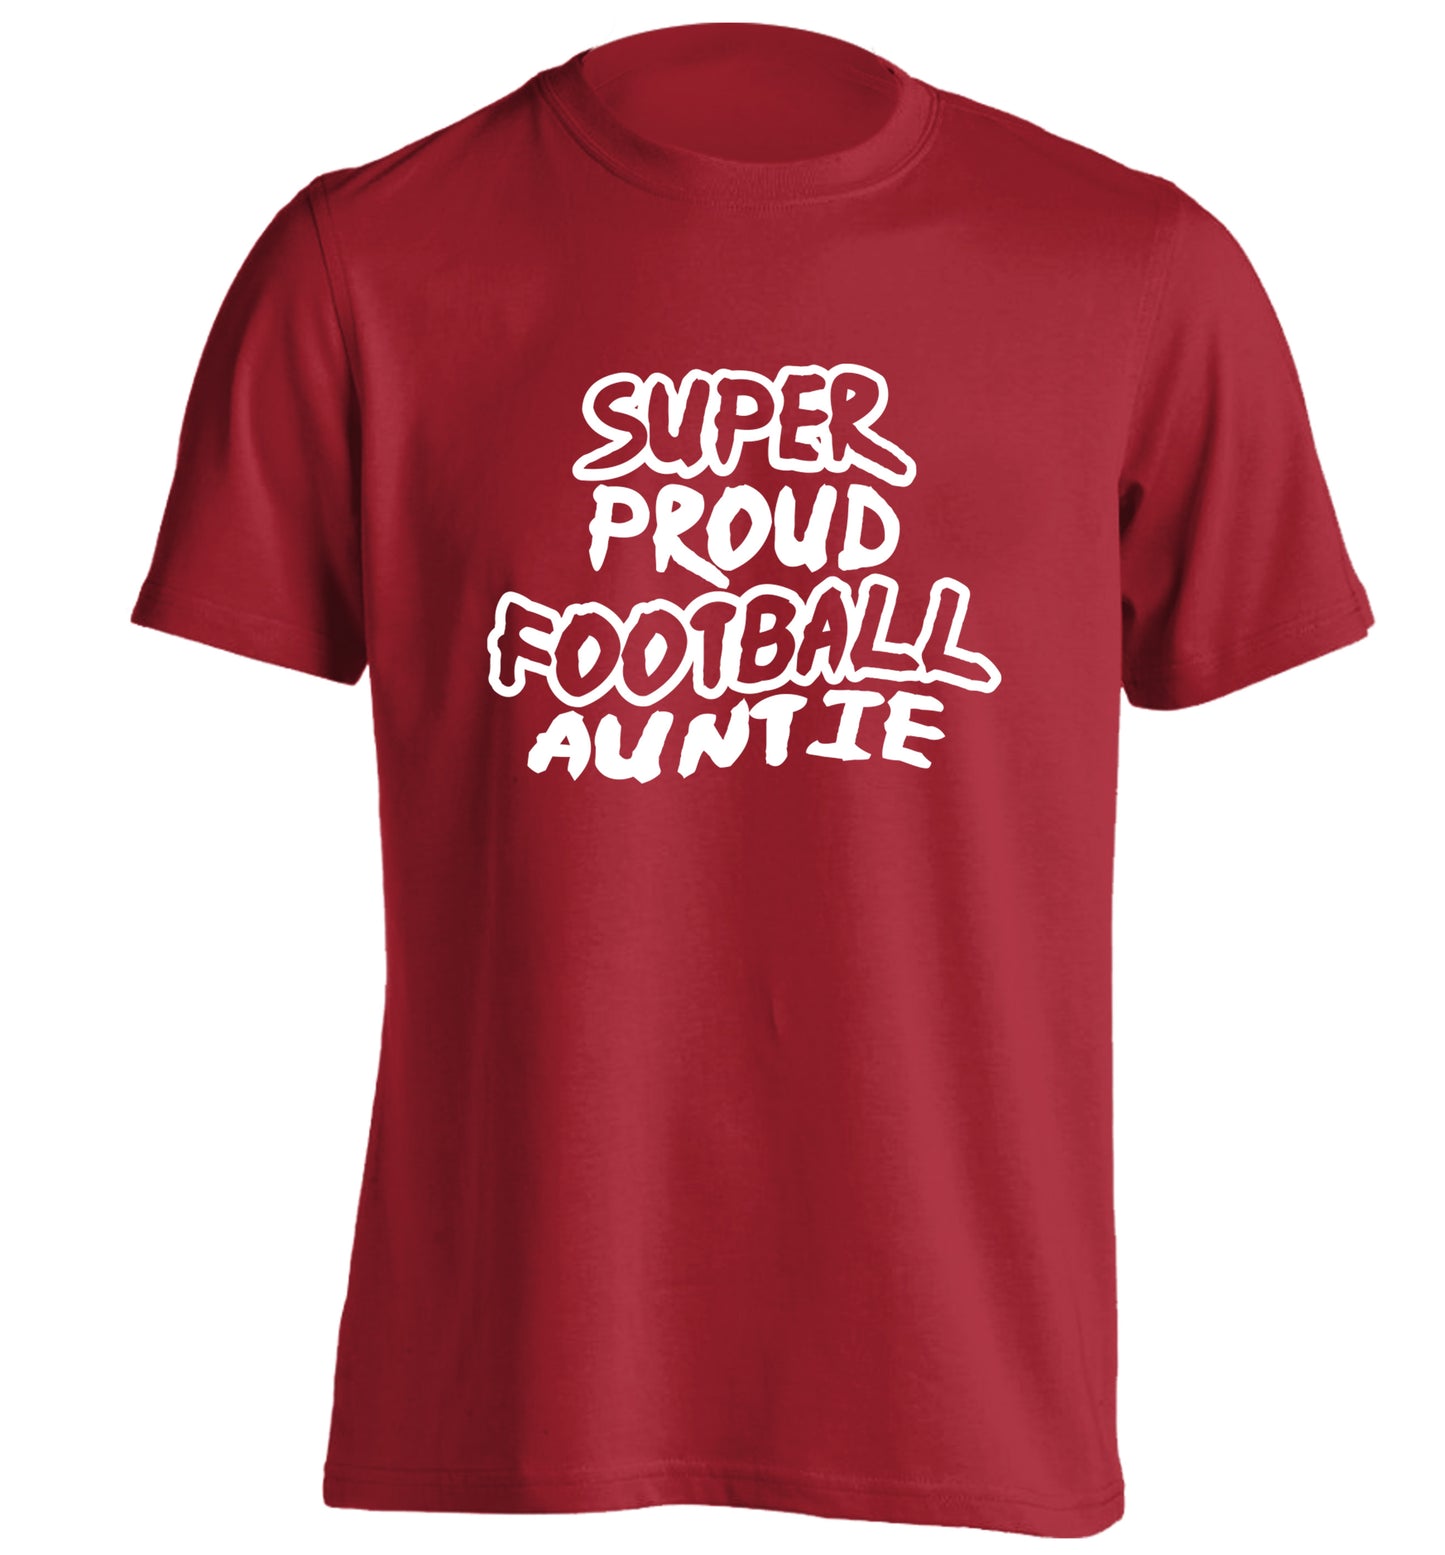 Super proud football auntie adults unisexred Tshirt 2XL